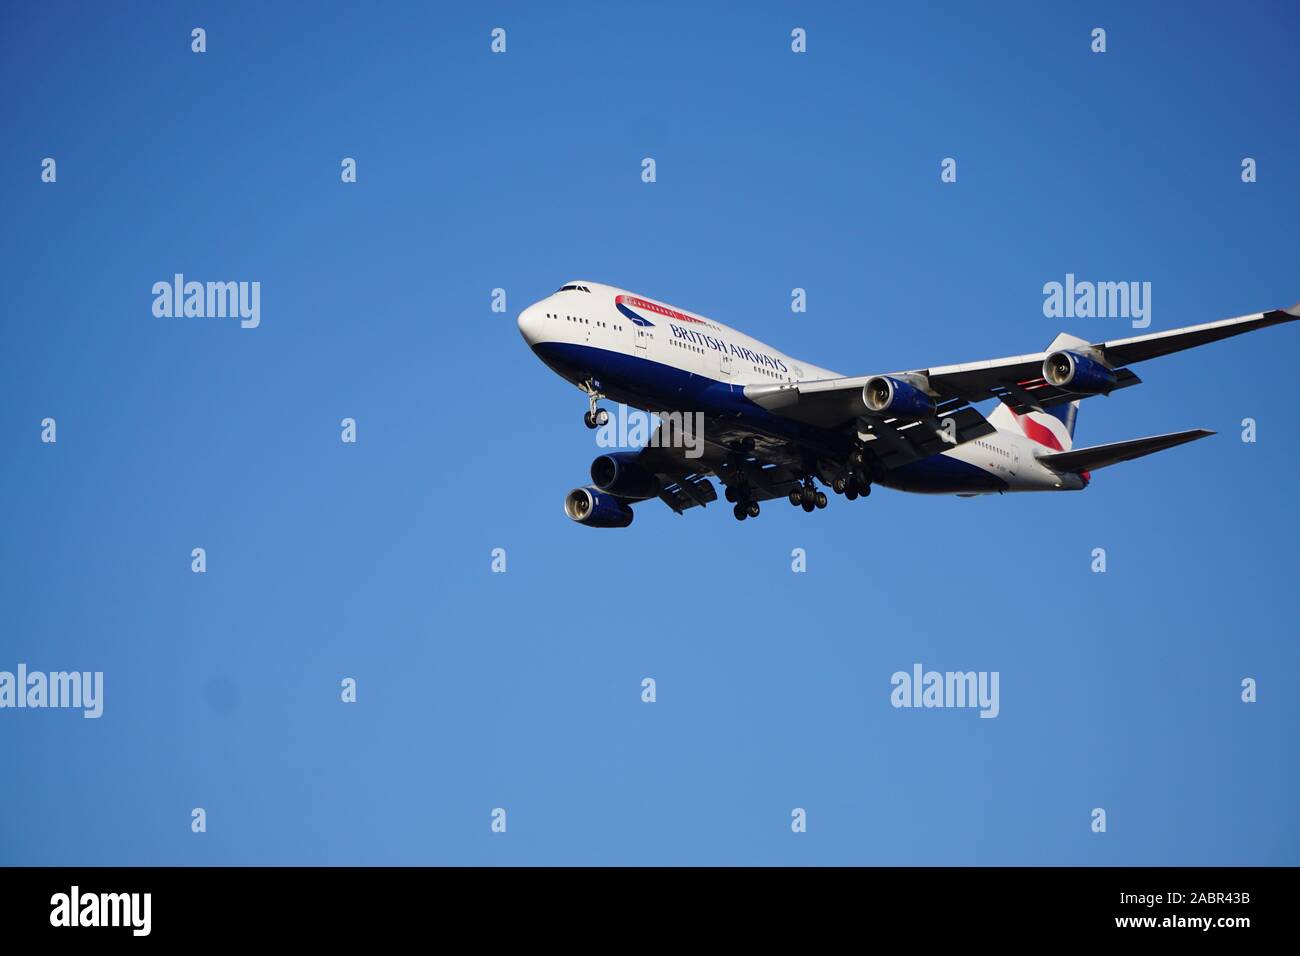 British Airways Boeing 747 Queen of the Skies on approach to Chicago's O'Hare International Airport after its flight from London Heathrow. Stock Photo